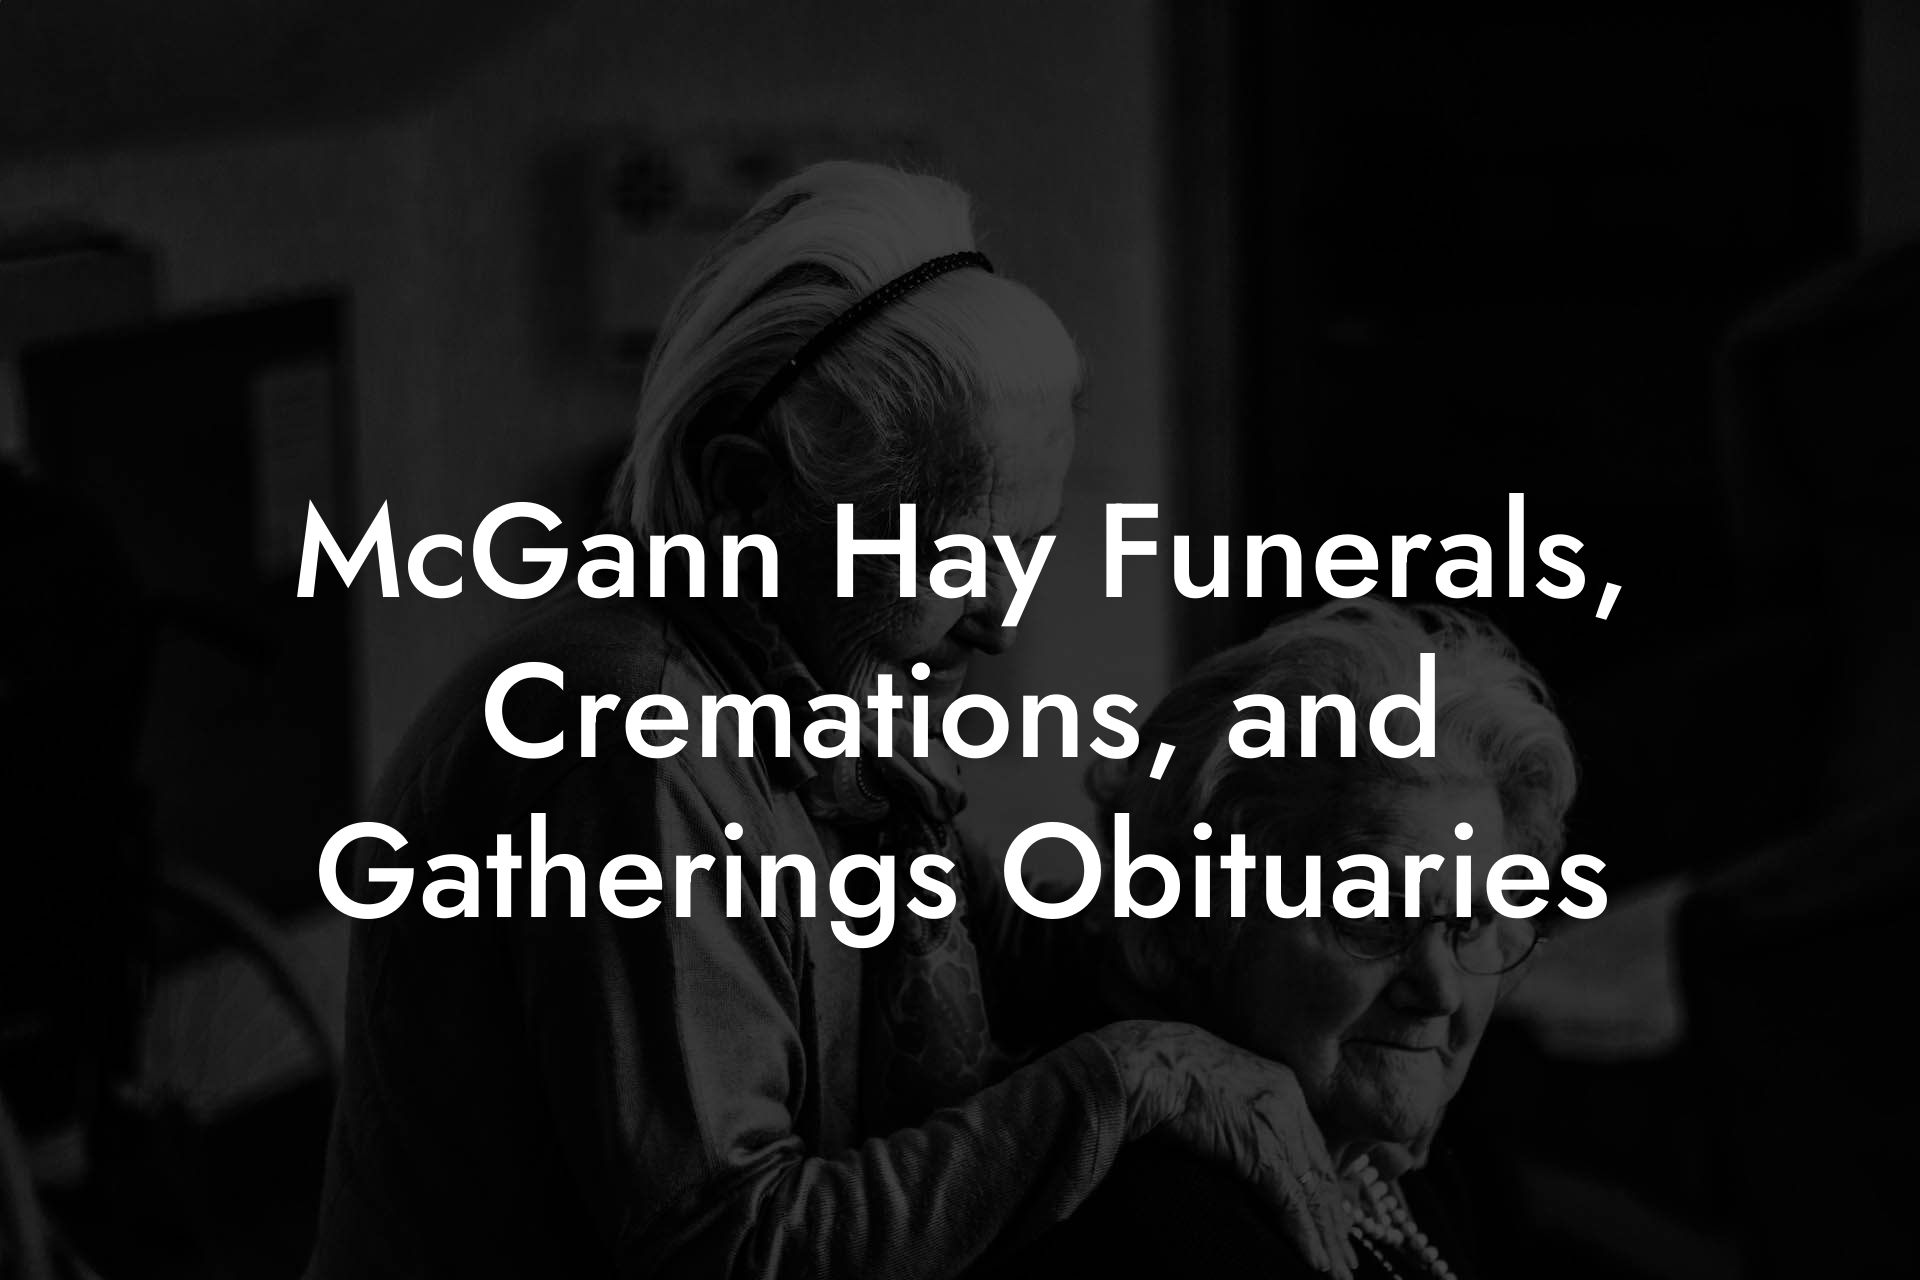 McGann Hay Funerals, Cremations, and Gatherings Obituaries